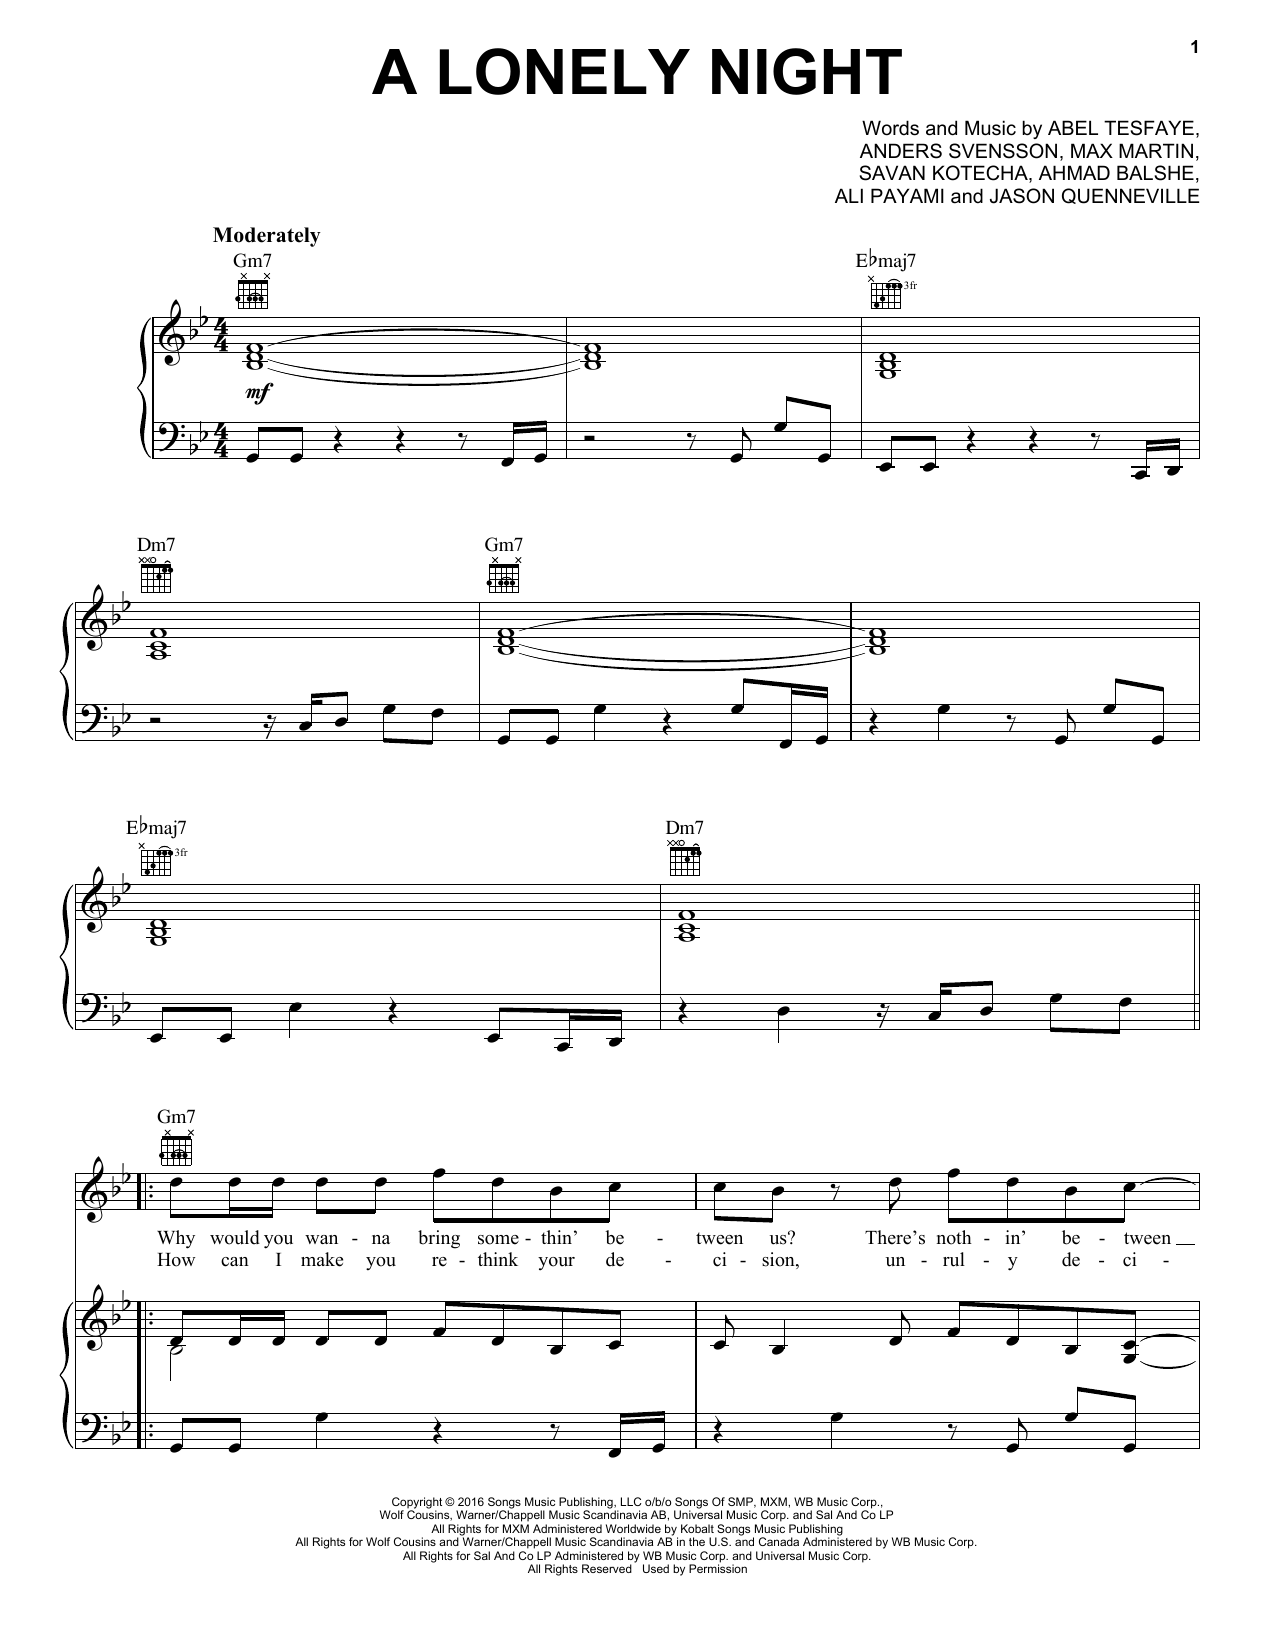 The Weeknd 'A Lonely Night' Sheet Music, Chords & Lyrics.